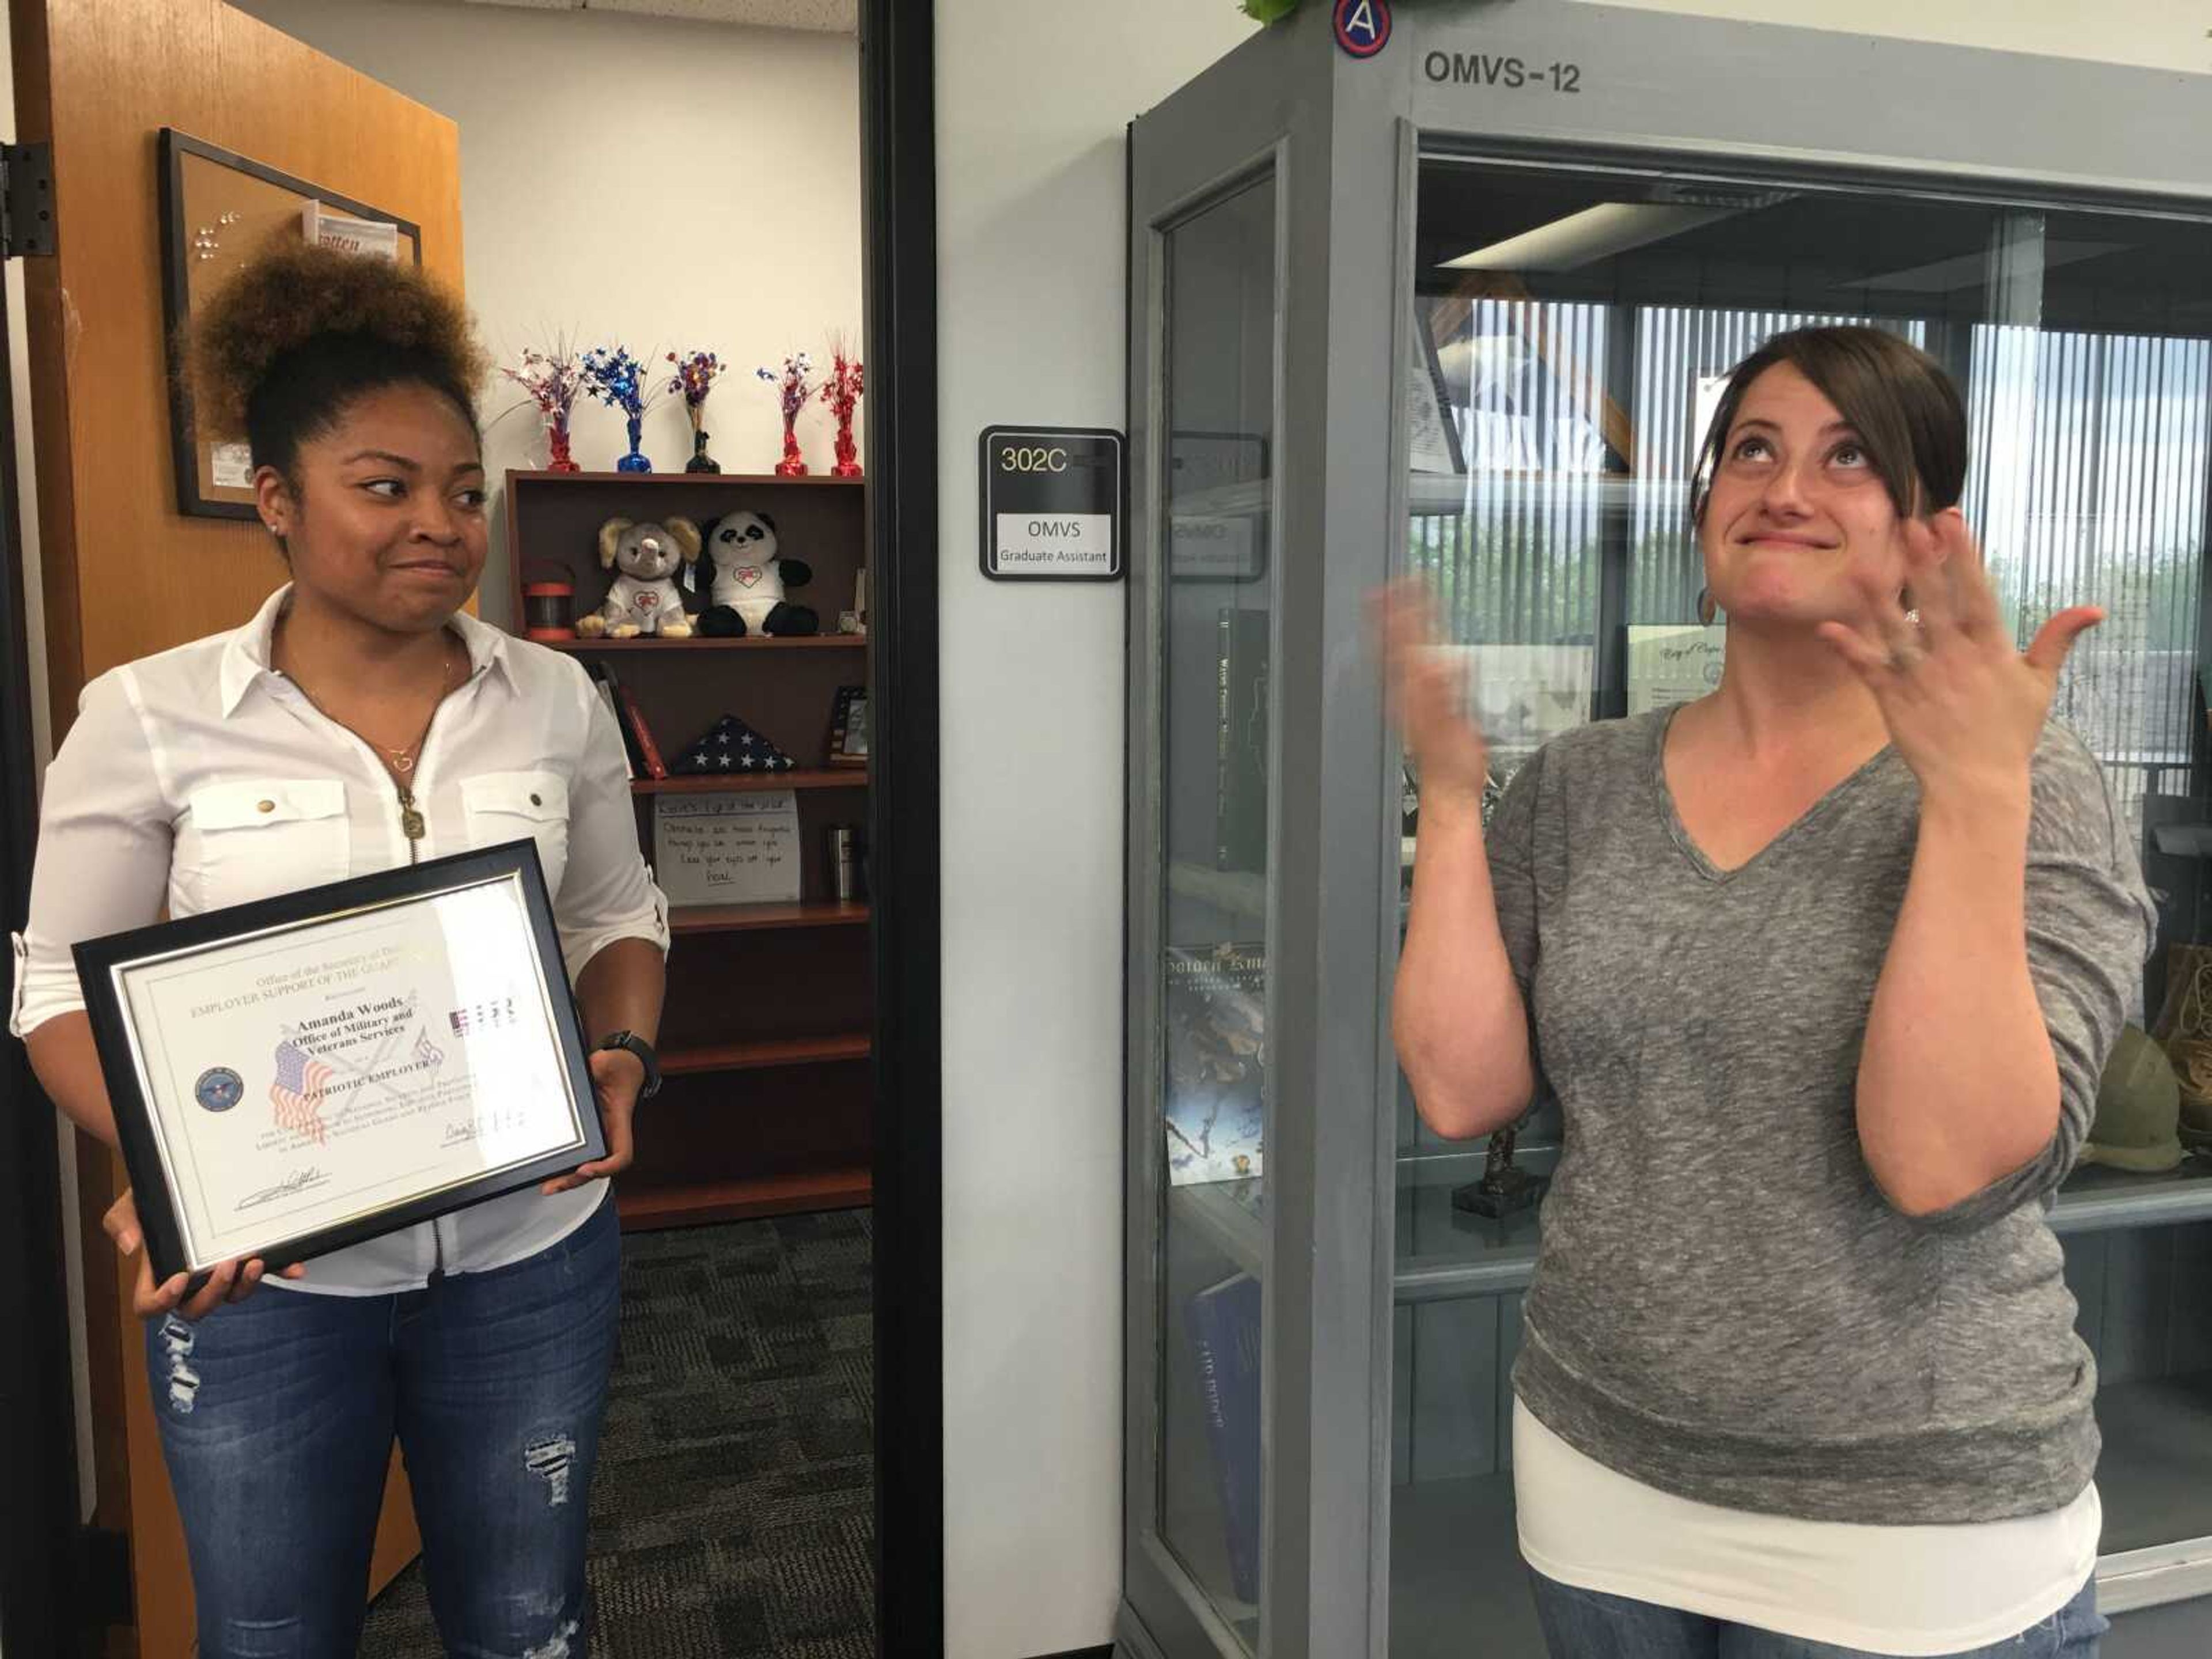 Amanda Woods (right) gets emotional upon receiving from the Patriot Award from Michellé Lang April 24 in the Office of Military and Veteran Services